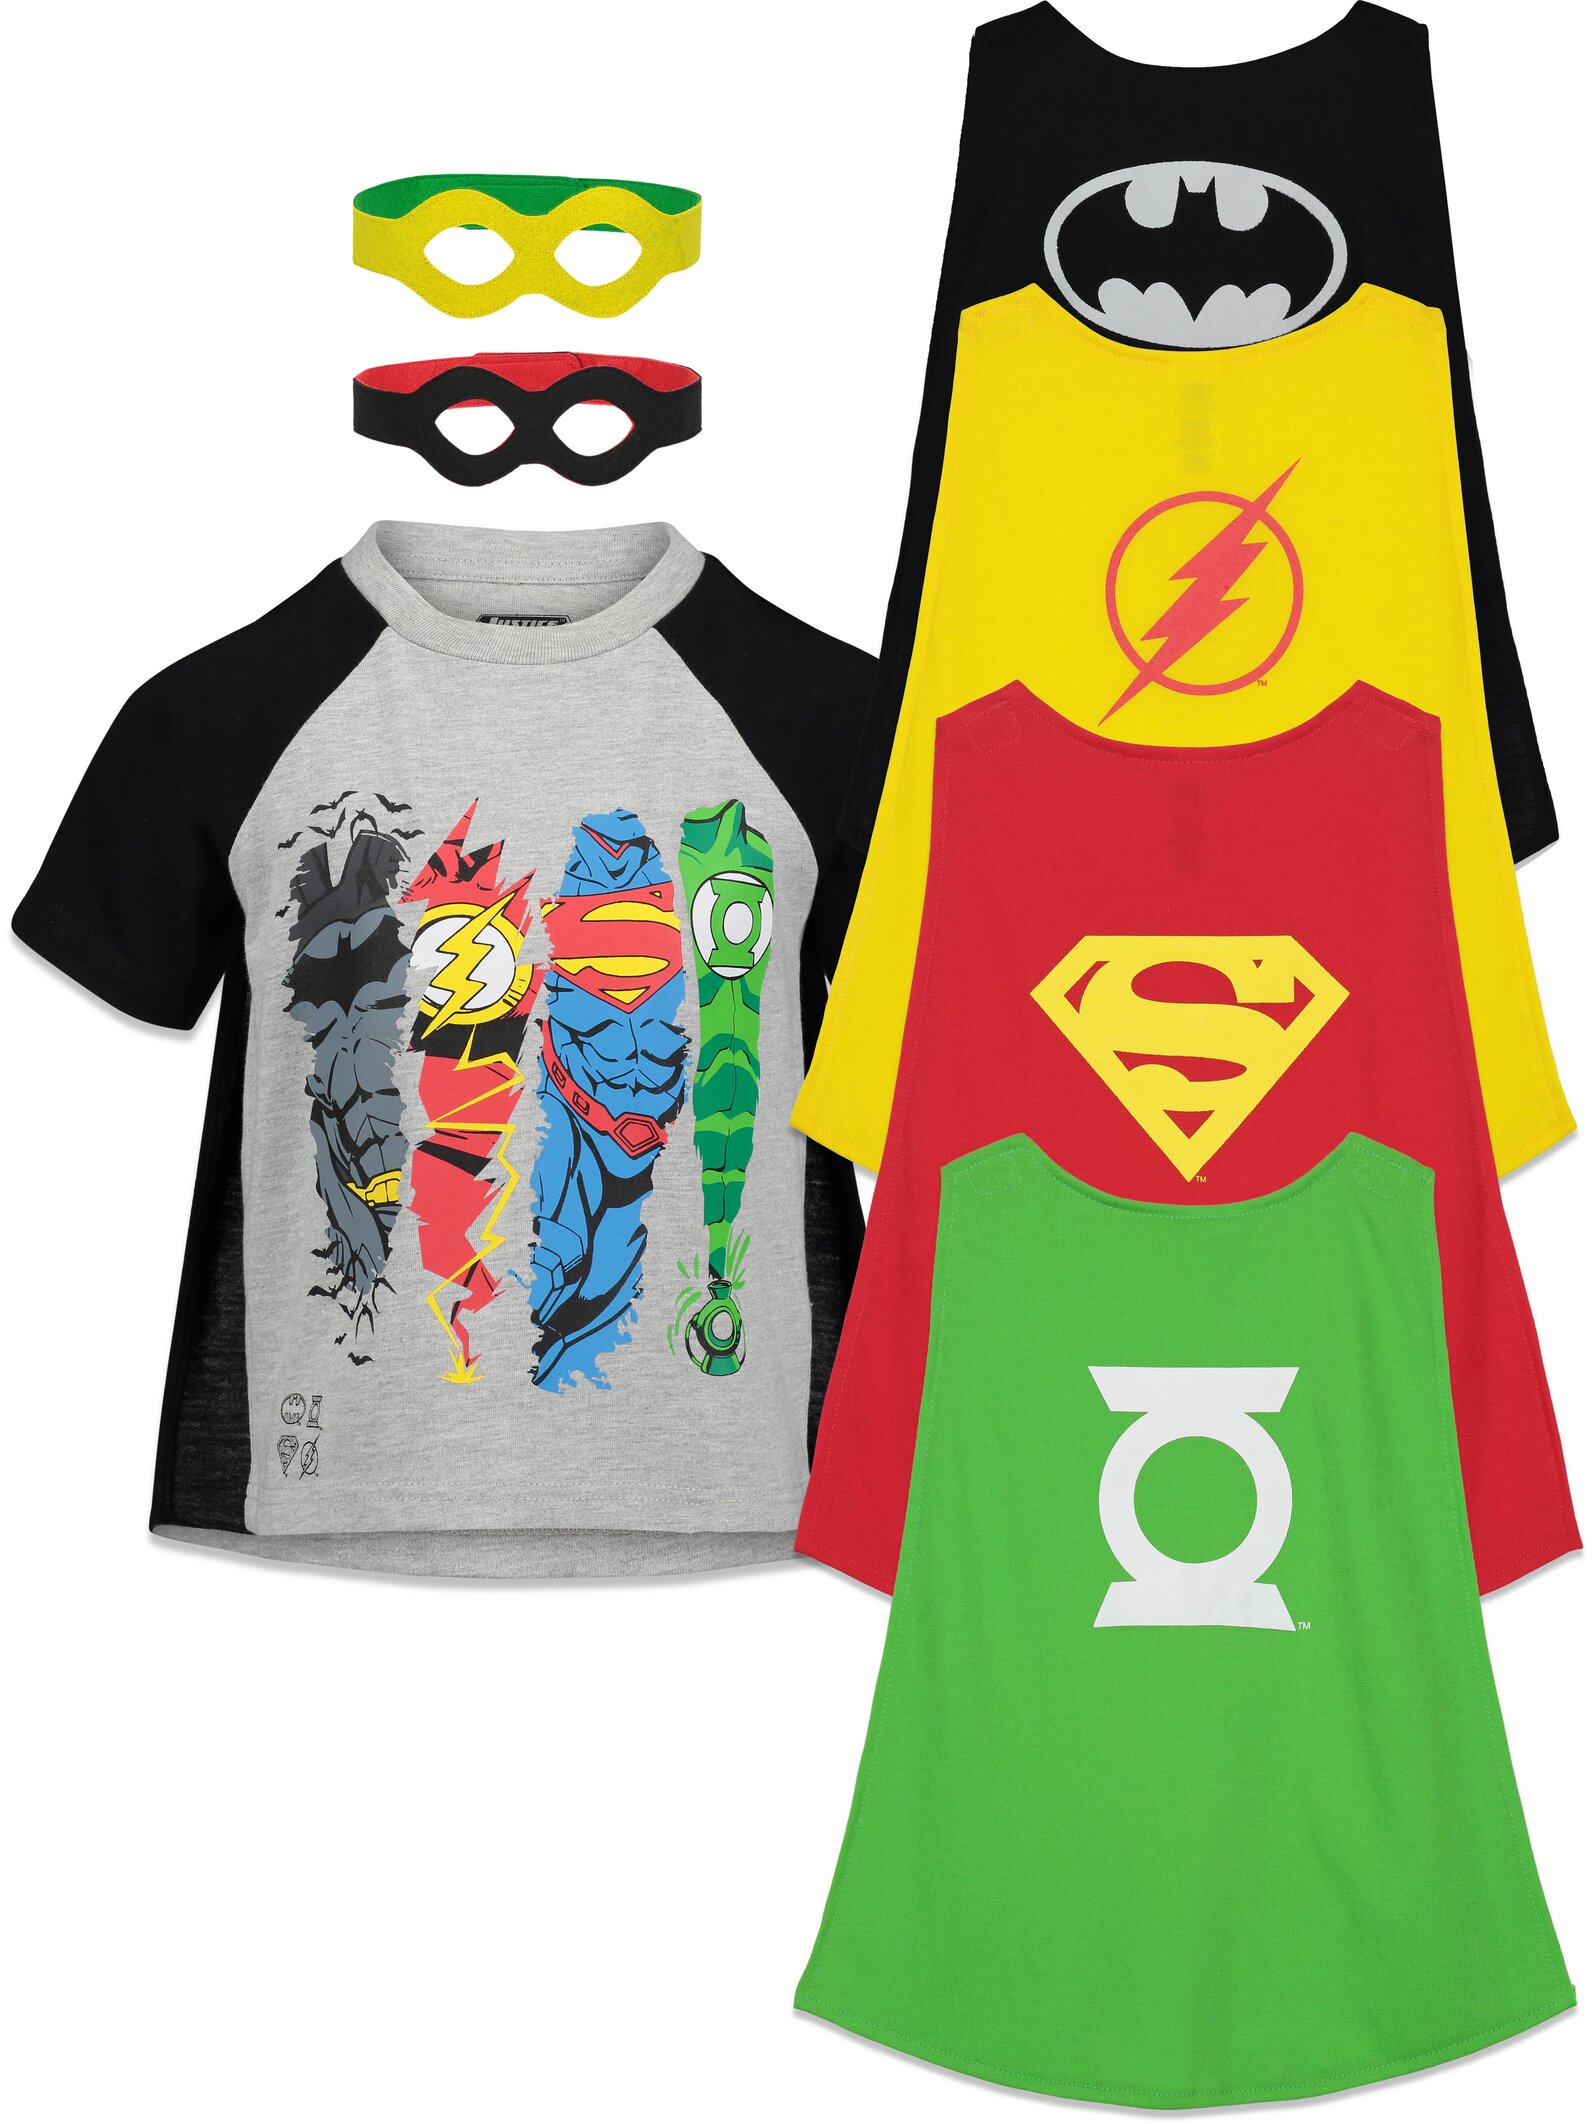 DC Comics Justice League Batman Superman The Flash Big Boys Costume T-Shirt Capes and Masks Mask 7 Piece Outfit Set Toddler to Big Kid - image 1 of 5